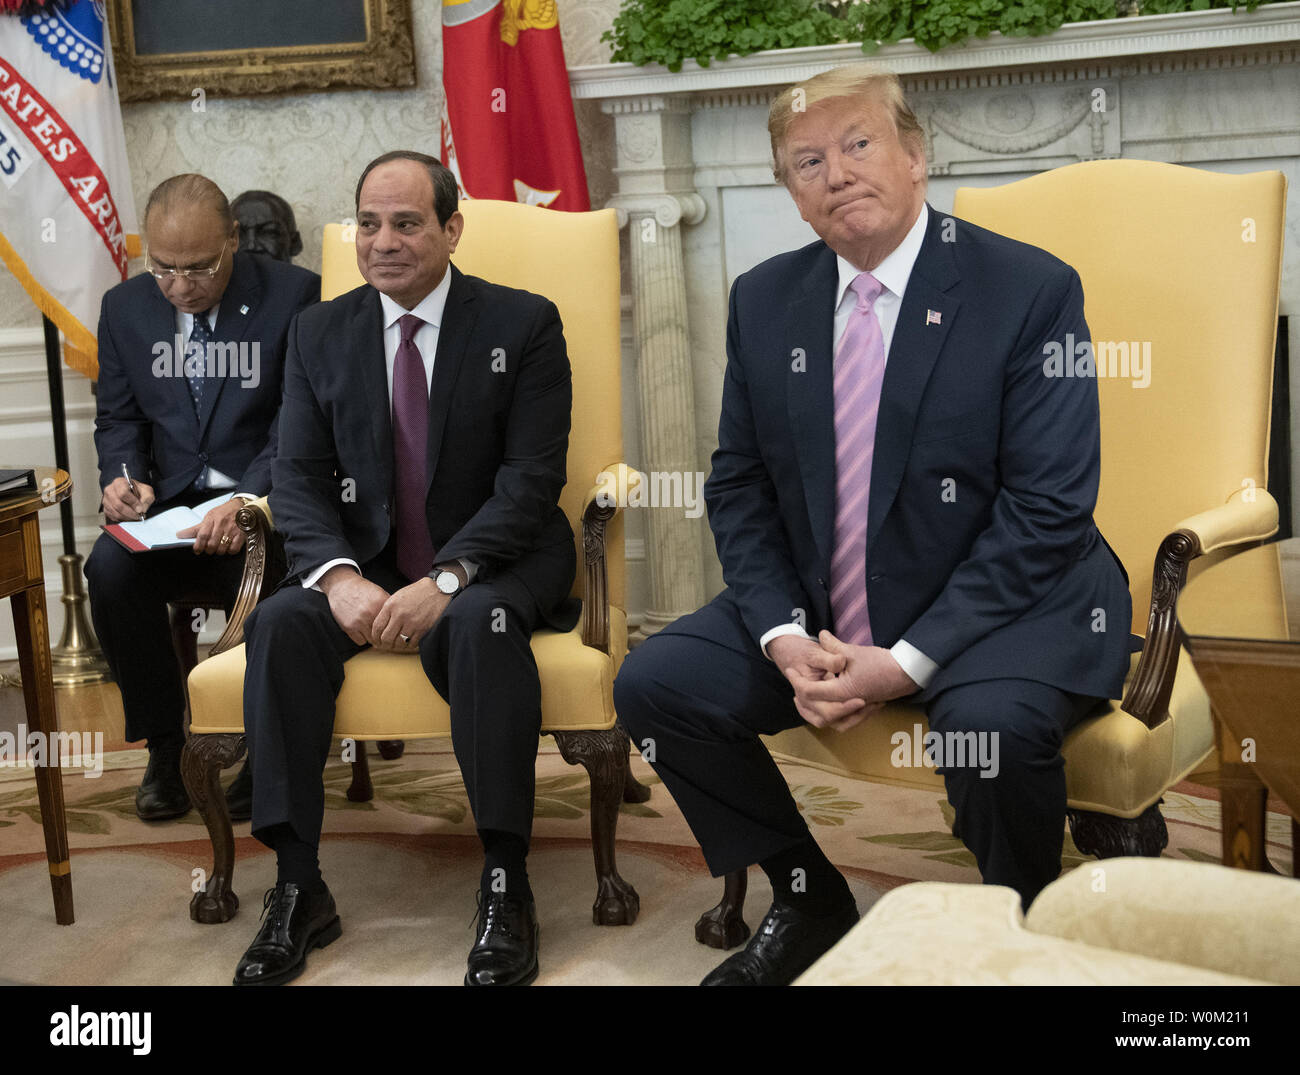 President Donald Trump (R) meets with Egyptian President Abdel Fattah el-Sisi in the Oval Office of the White House in Washington, DC on April 9, 2019.  El-Sisi is visiting the White House for talks.     Photo by Ron Sachs/UPI Stock Photo